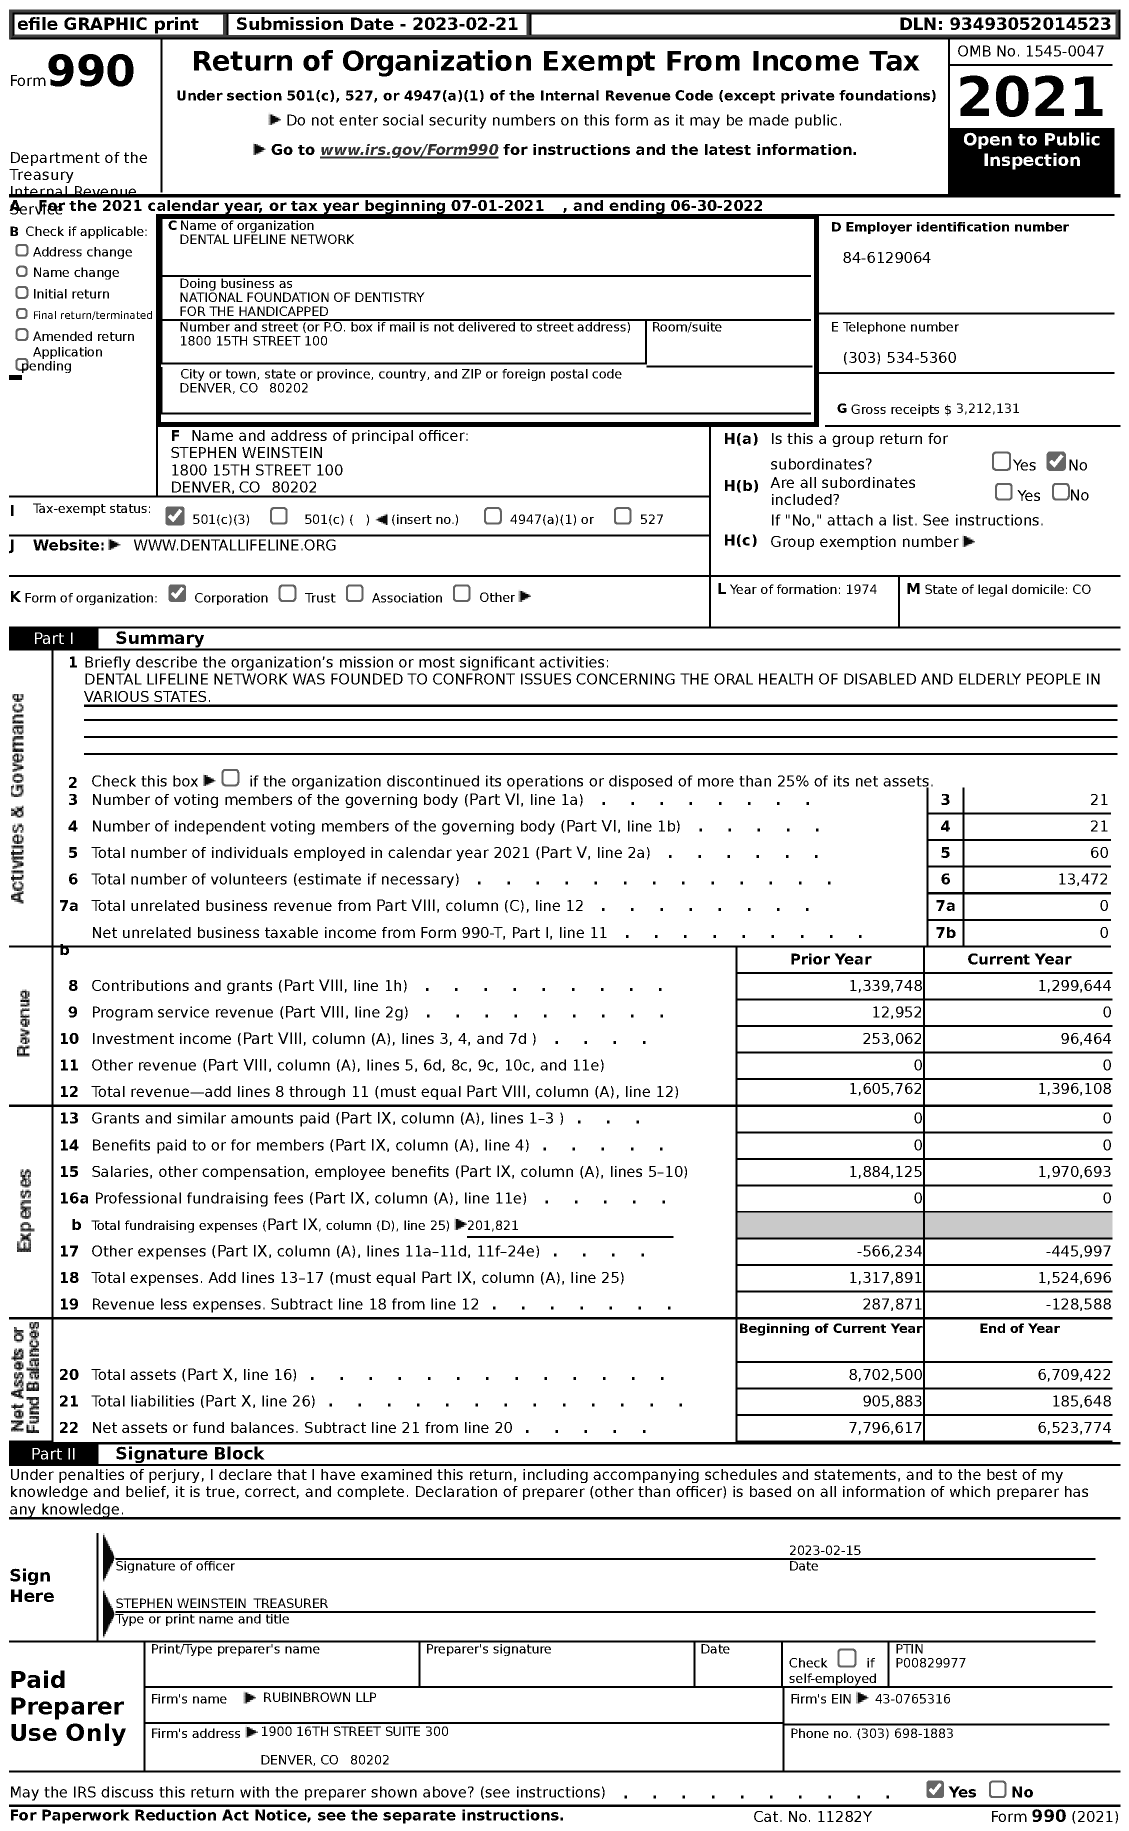 Image of first page of 2021 Form 990 for National Foundation of Dentistry for The Handicapped / Dental Lifeline Network (DLN)